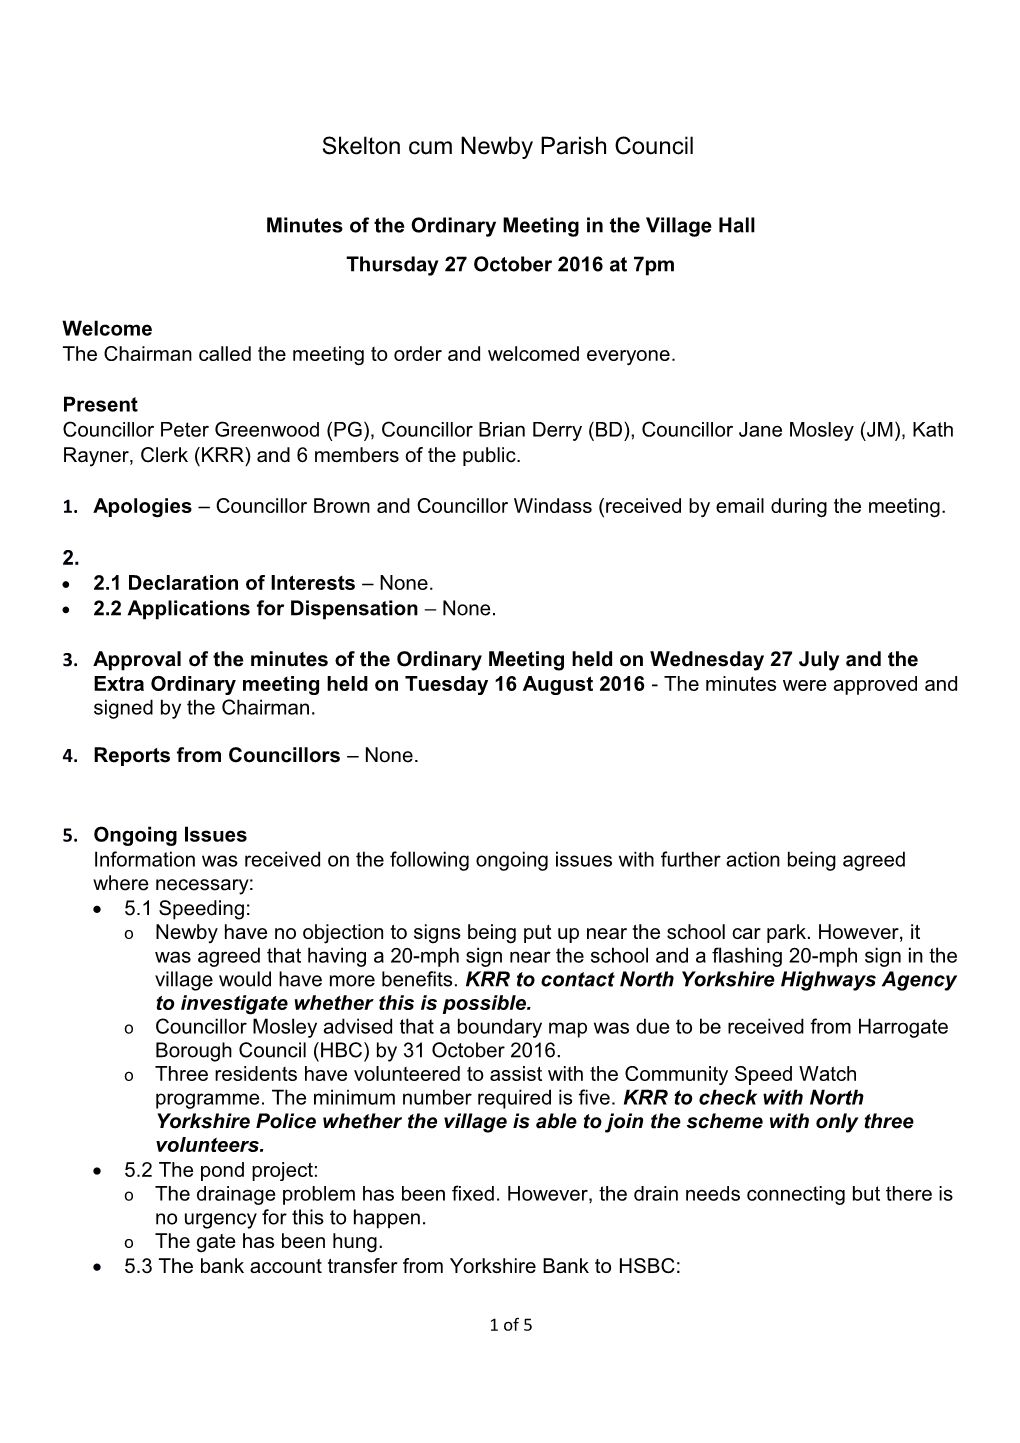 Minutes of the Ordinary Meeting in the Village Hall